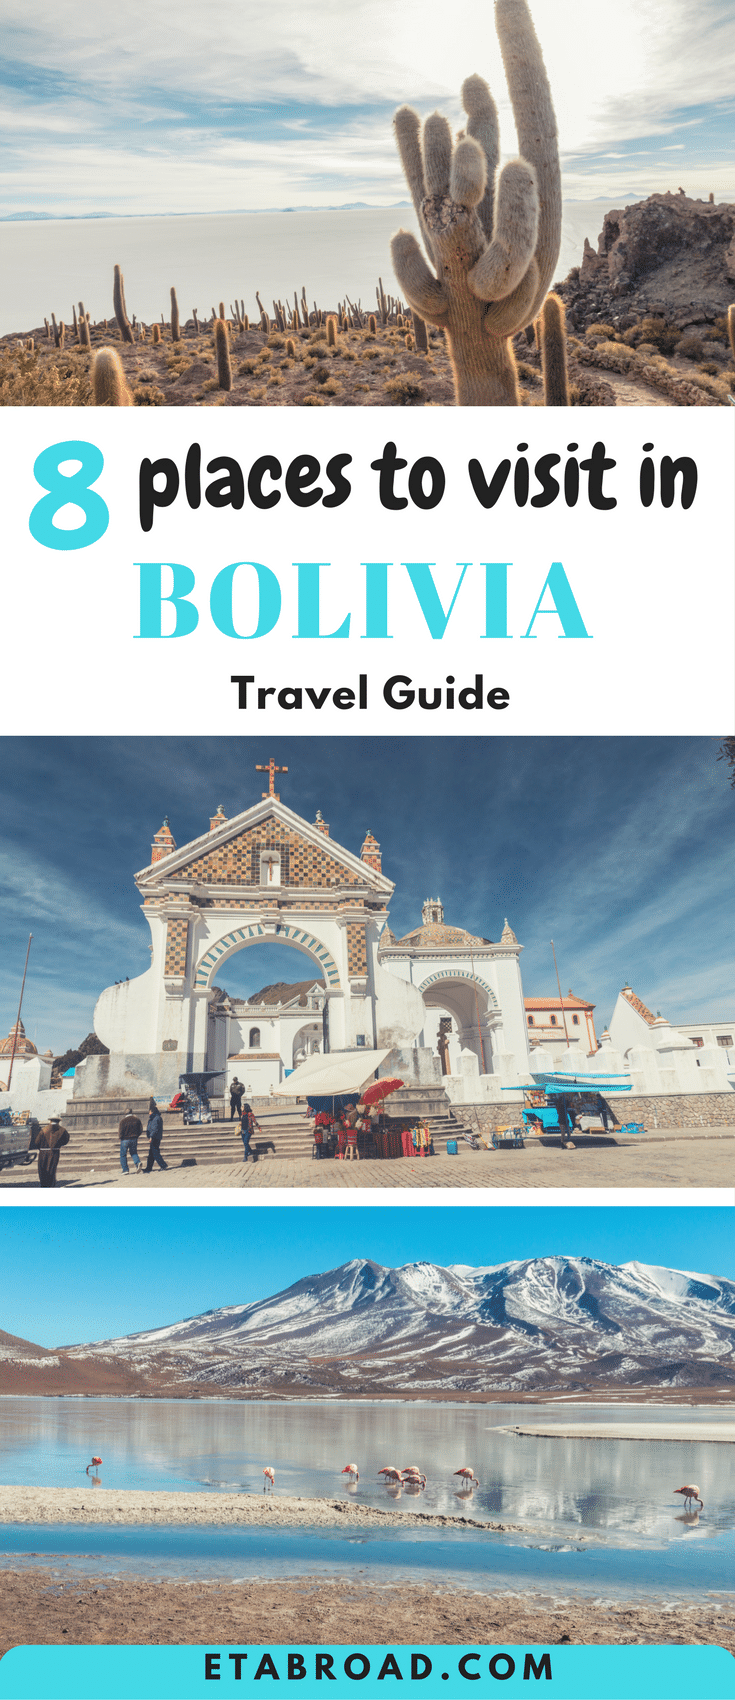 8 best places to visit in Bolivia